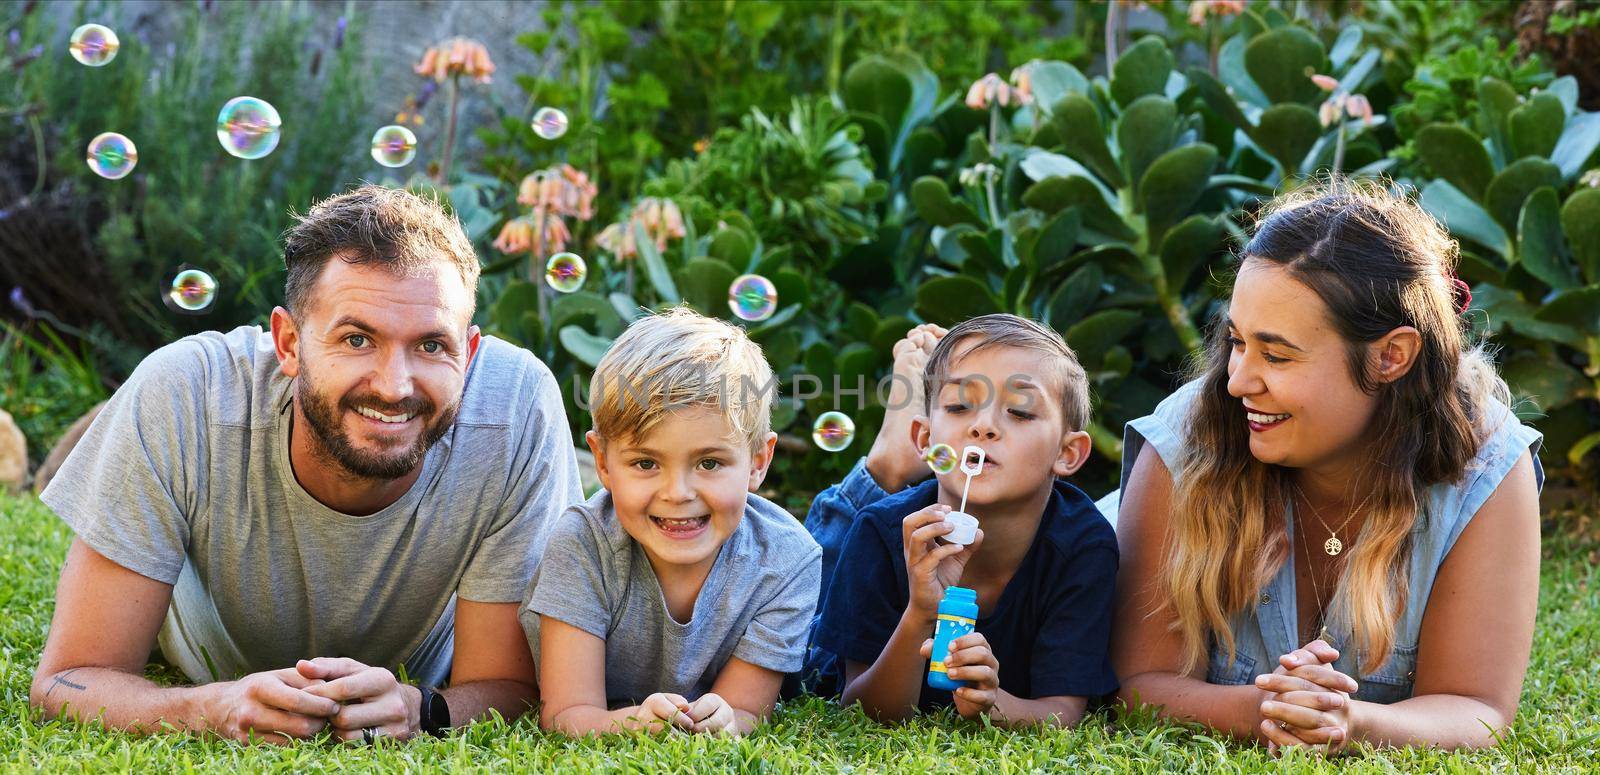 Portrait of a beautiful family laying on the grass and playing with bubbles in a backyard.